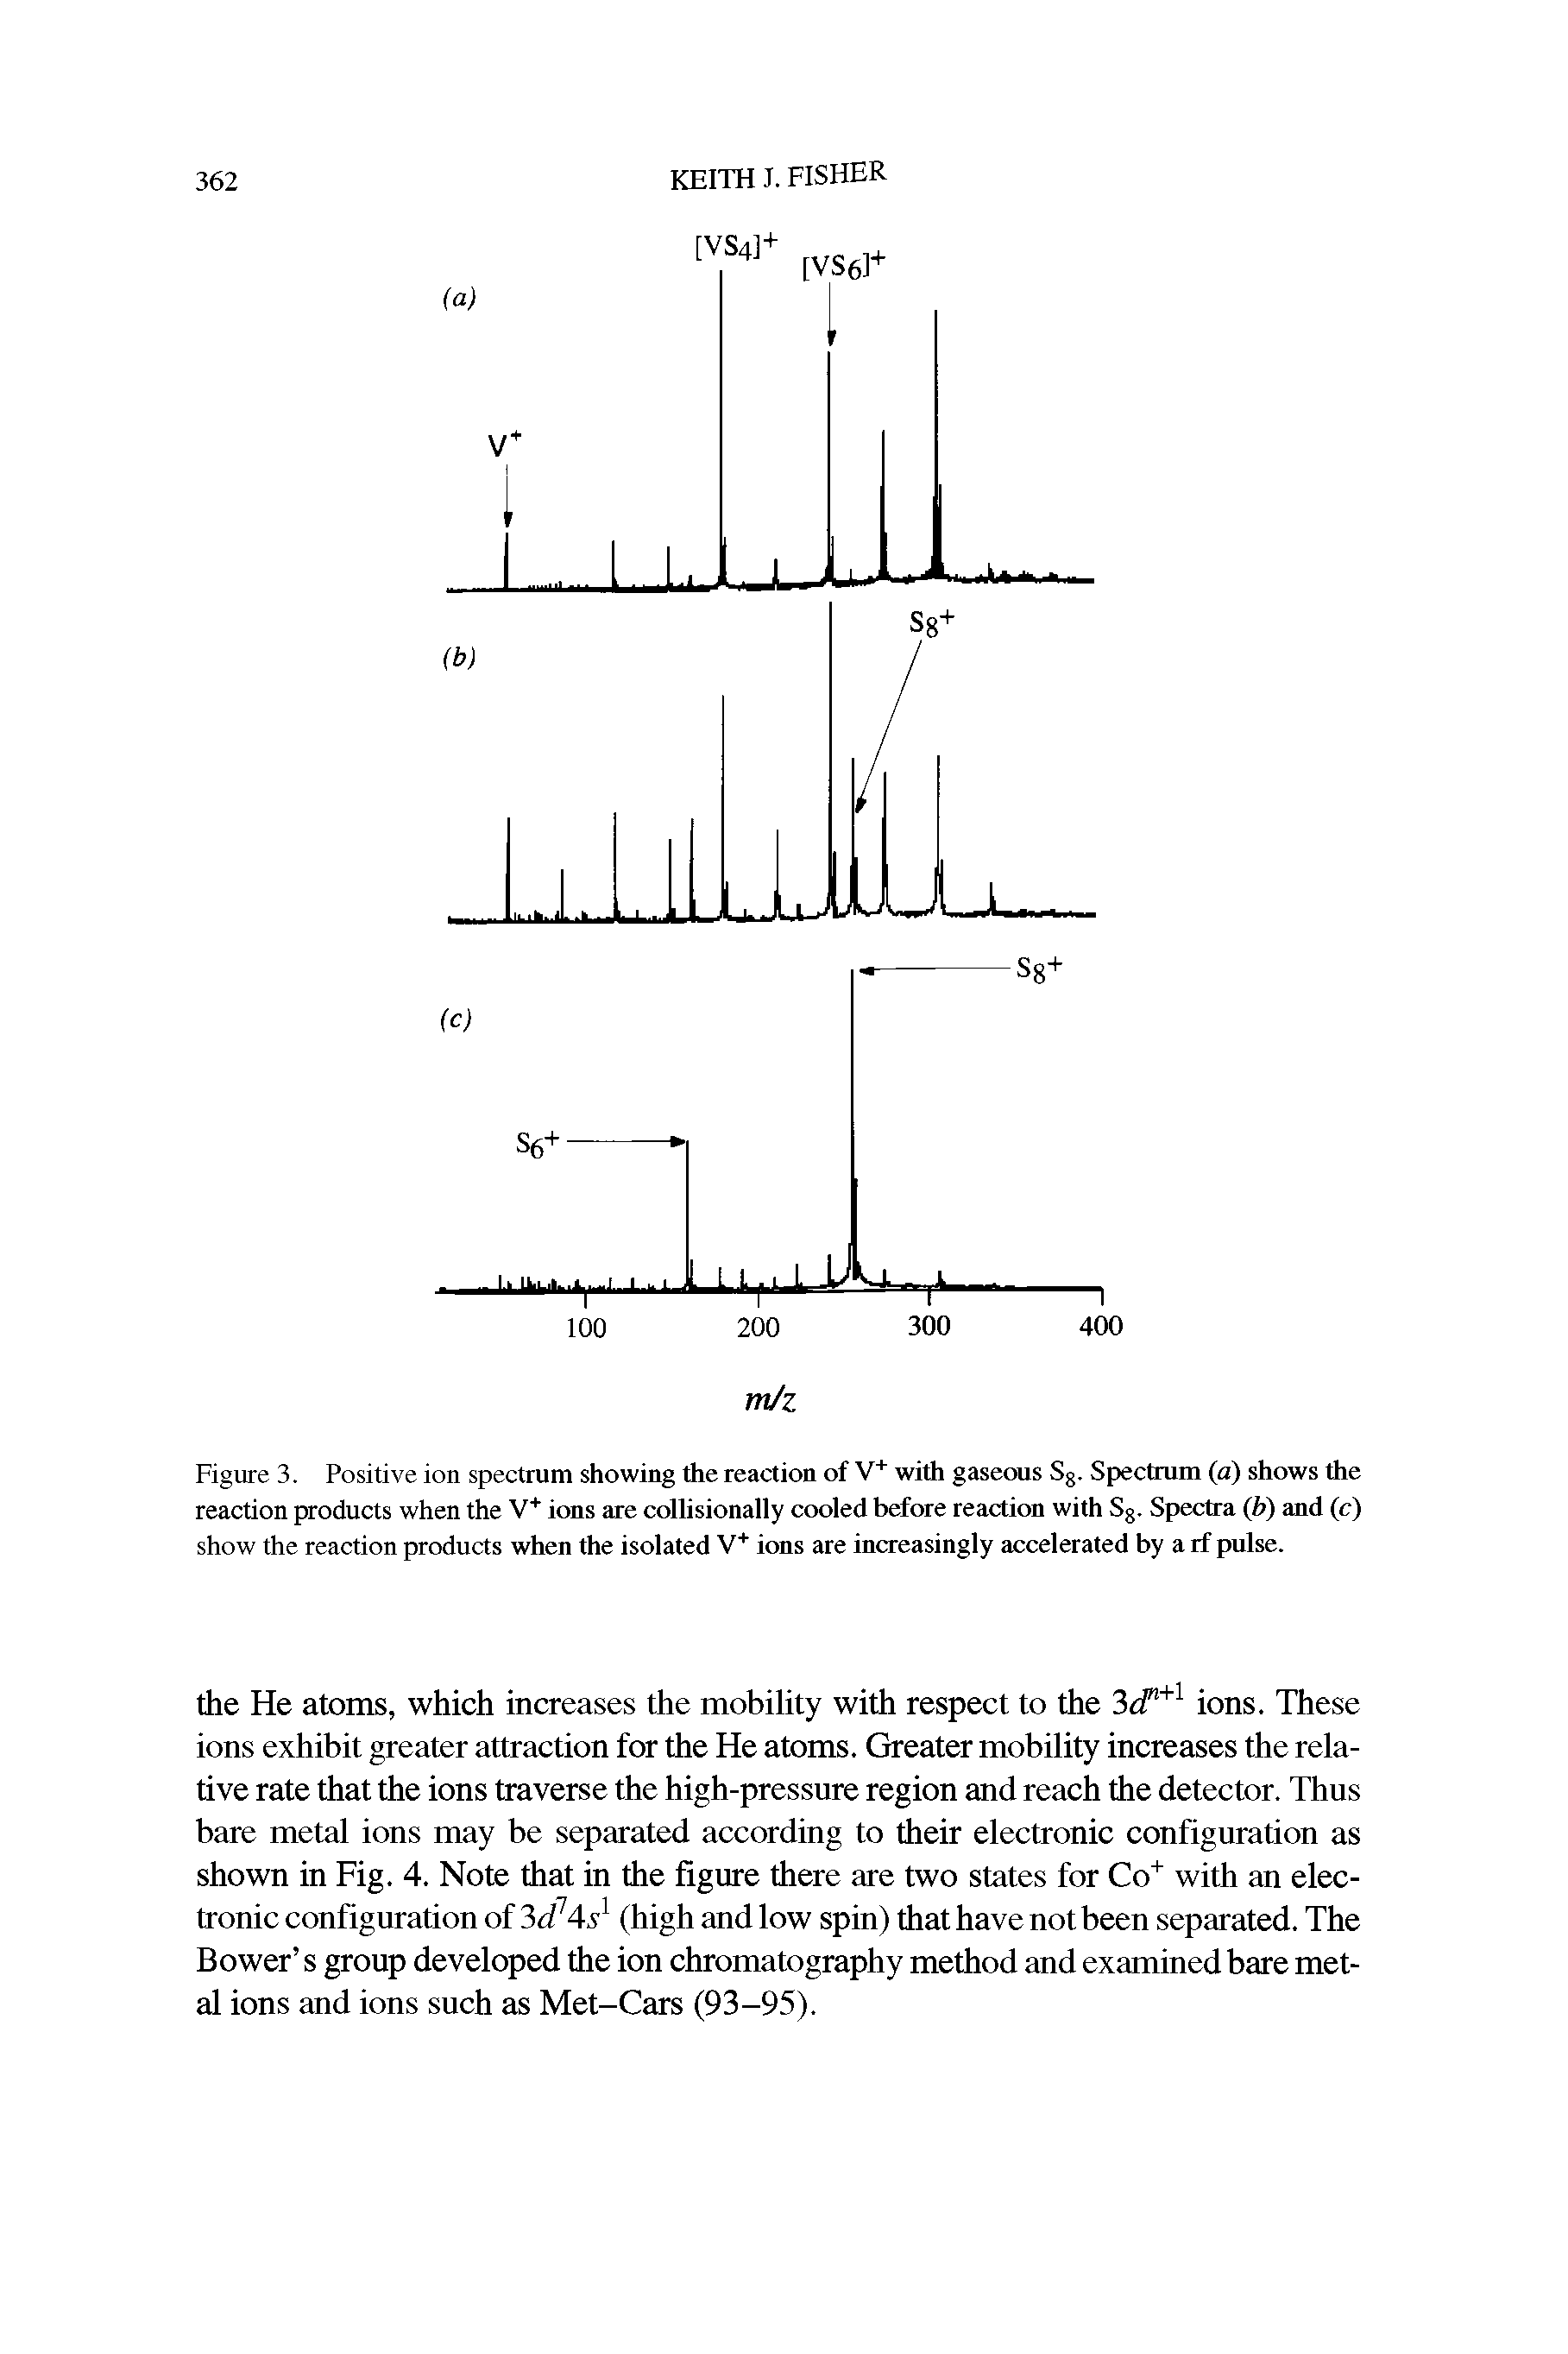 Figure 3. Positive ion spectrum showing the reaction of V+ with gaseous Sg. Spectrum (a) shows the reaction products when the V+ ions are collisionally cooled before reaction with Sg. Spectra (b) and (c) show the reaction products when the isolated V+ ions are increasingly accelerated by a rf pulse.